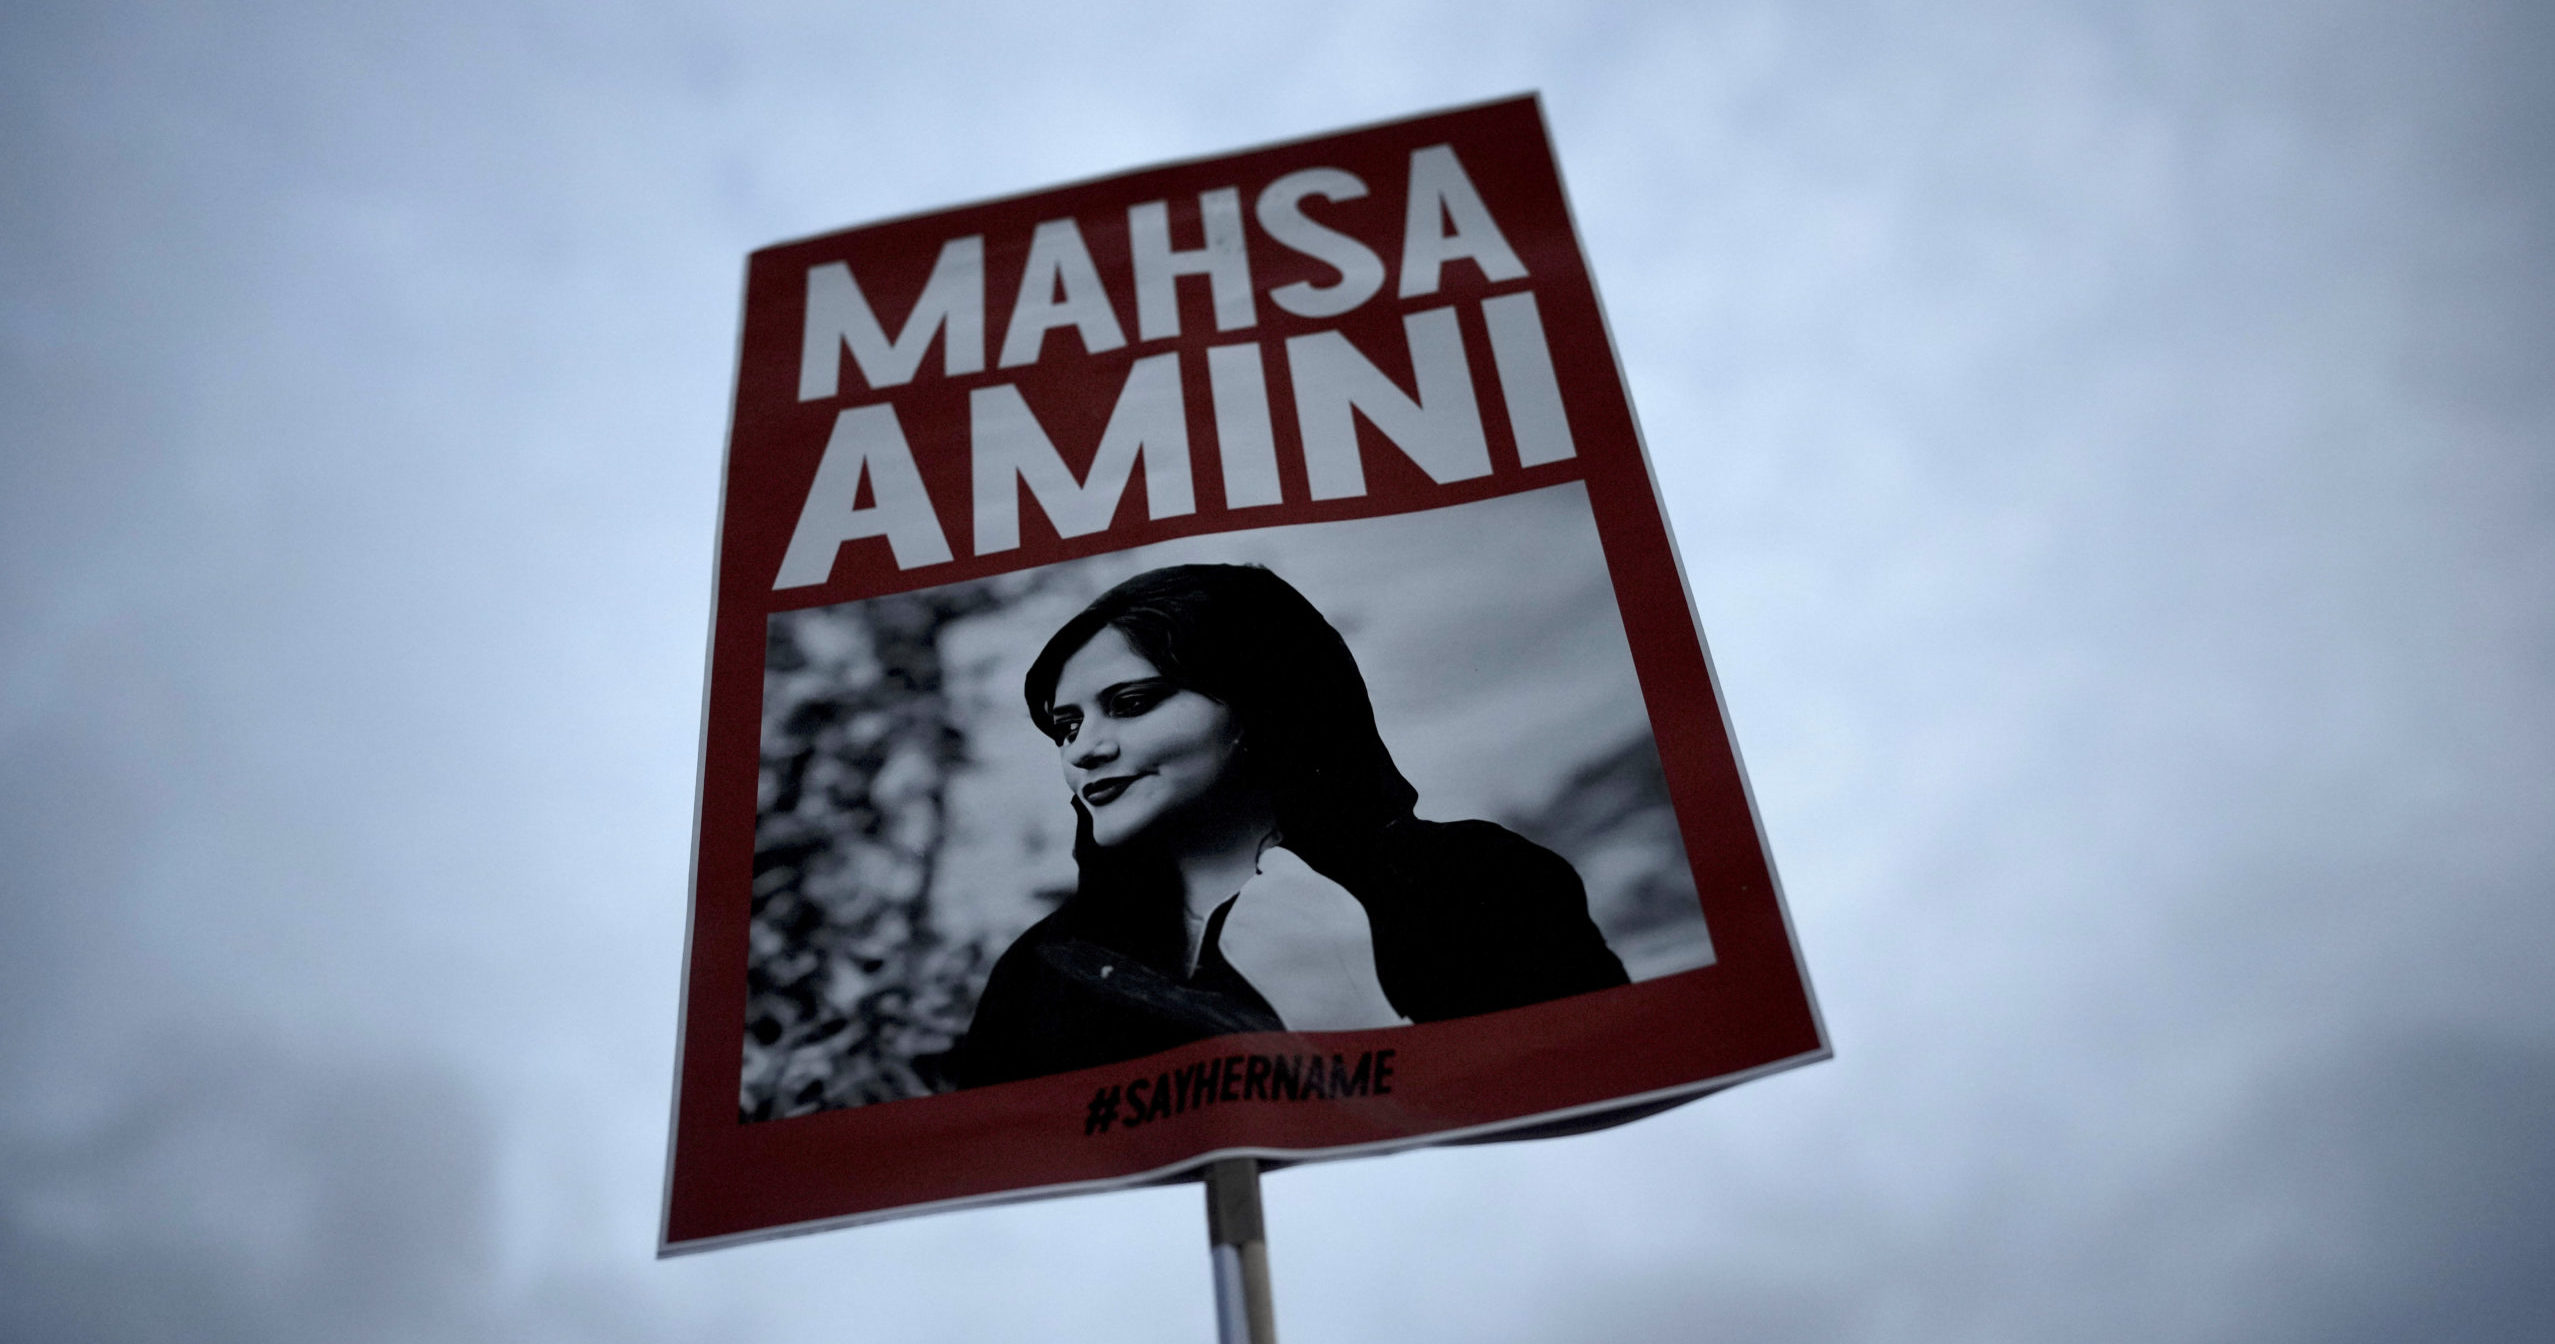 Demonstrators hold a placard with a picture of Iranian woman Mahsa Amini during a protest against her death, in Berlin, Germany, on Sept. 28, 2022.